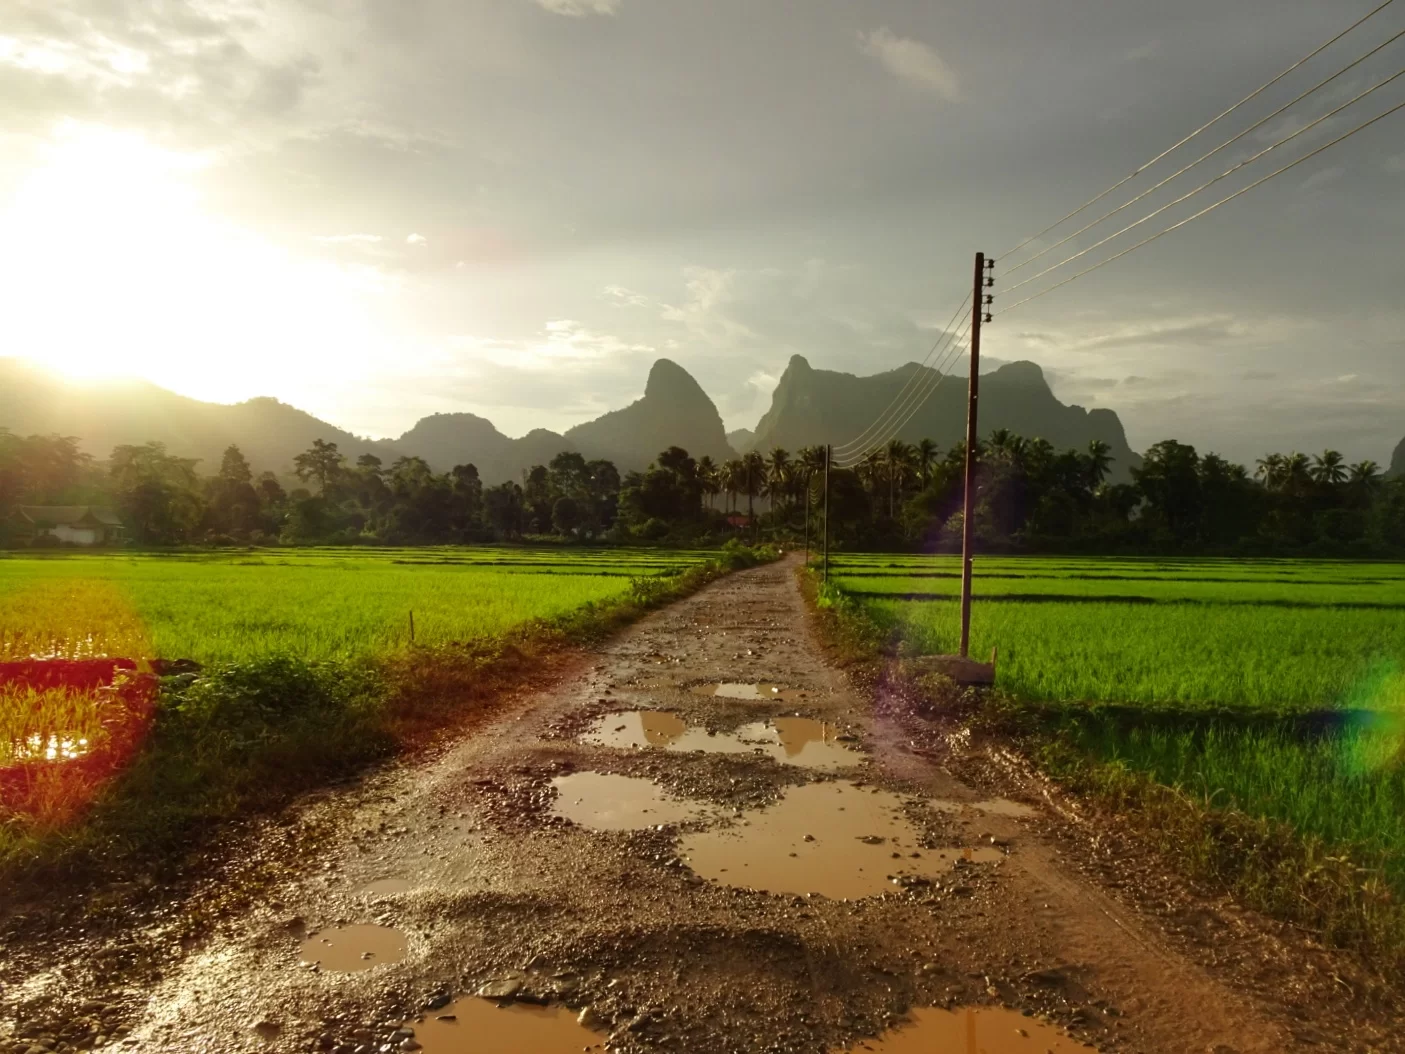 Laos: Vang Vieng, So Much More Than Drugs and Tubing